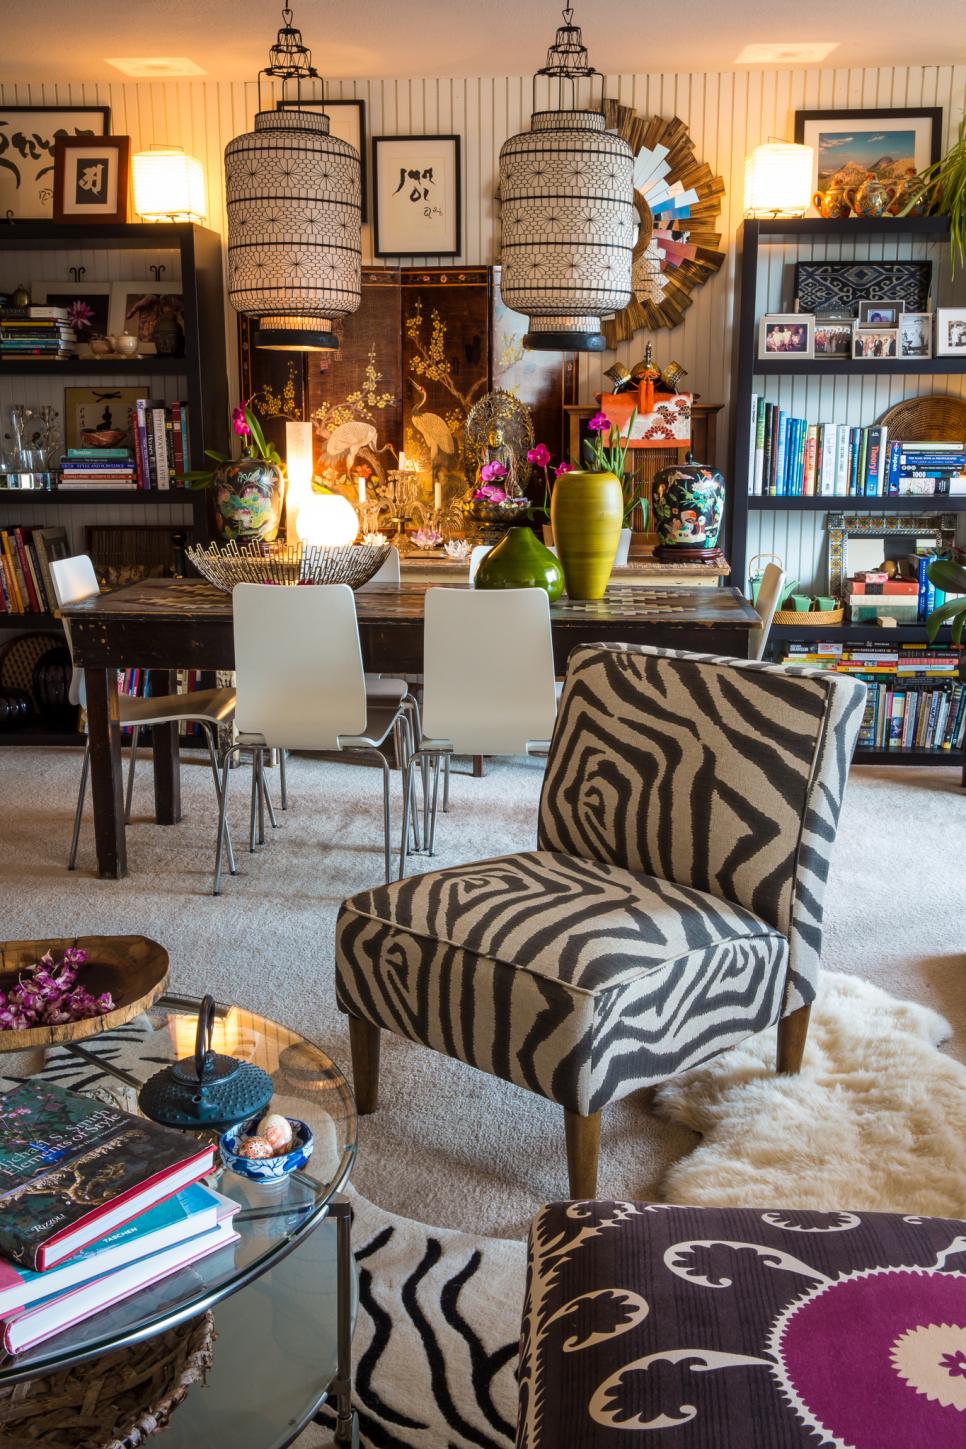 Global Living & Dining Room With Funky Zebra Chair | HGTV